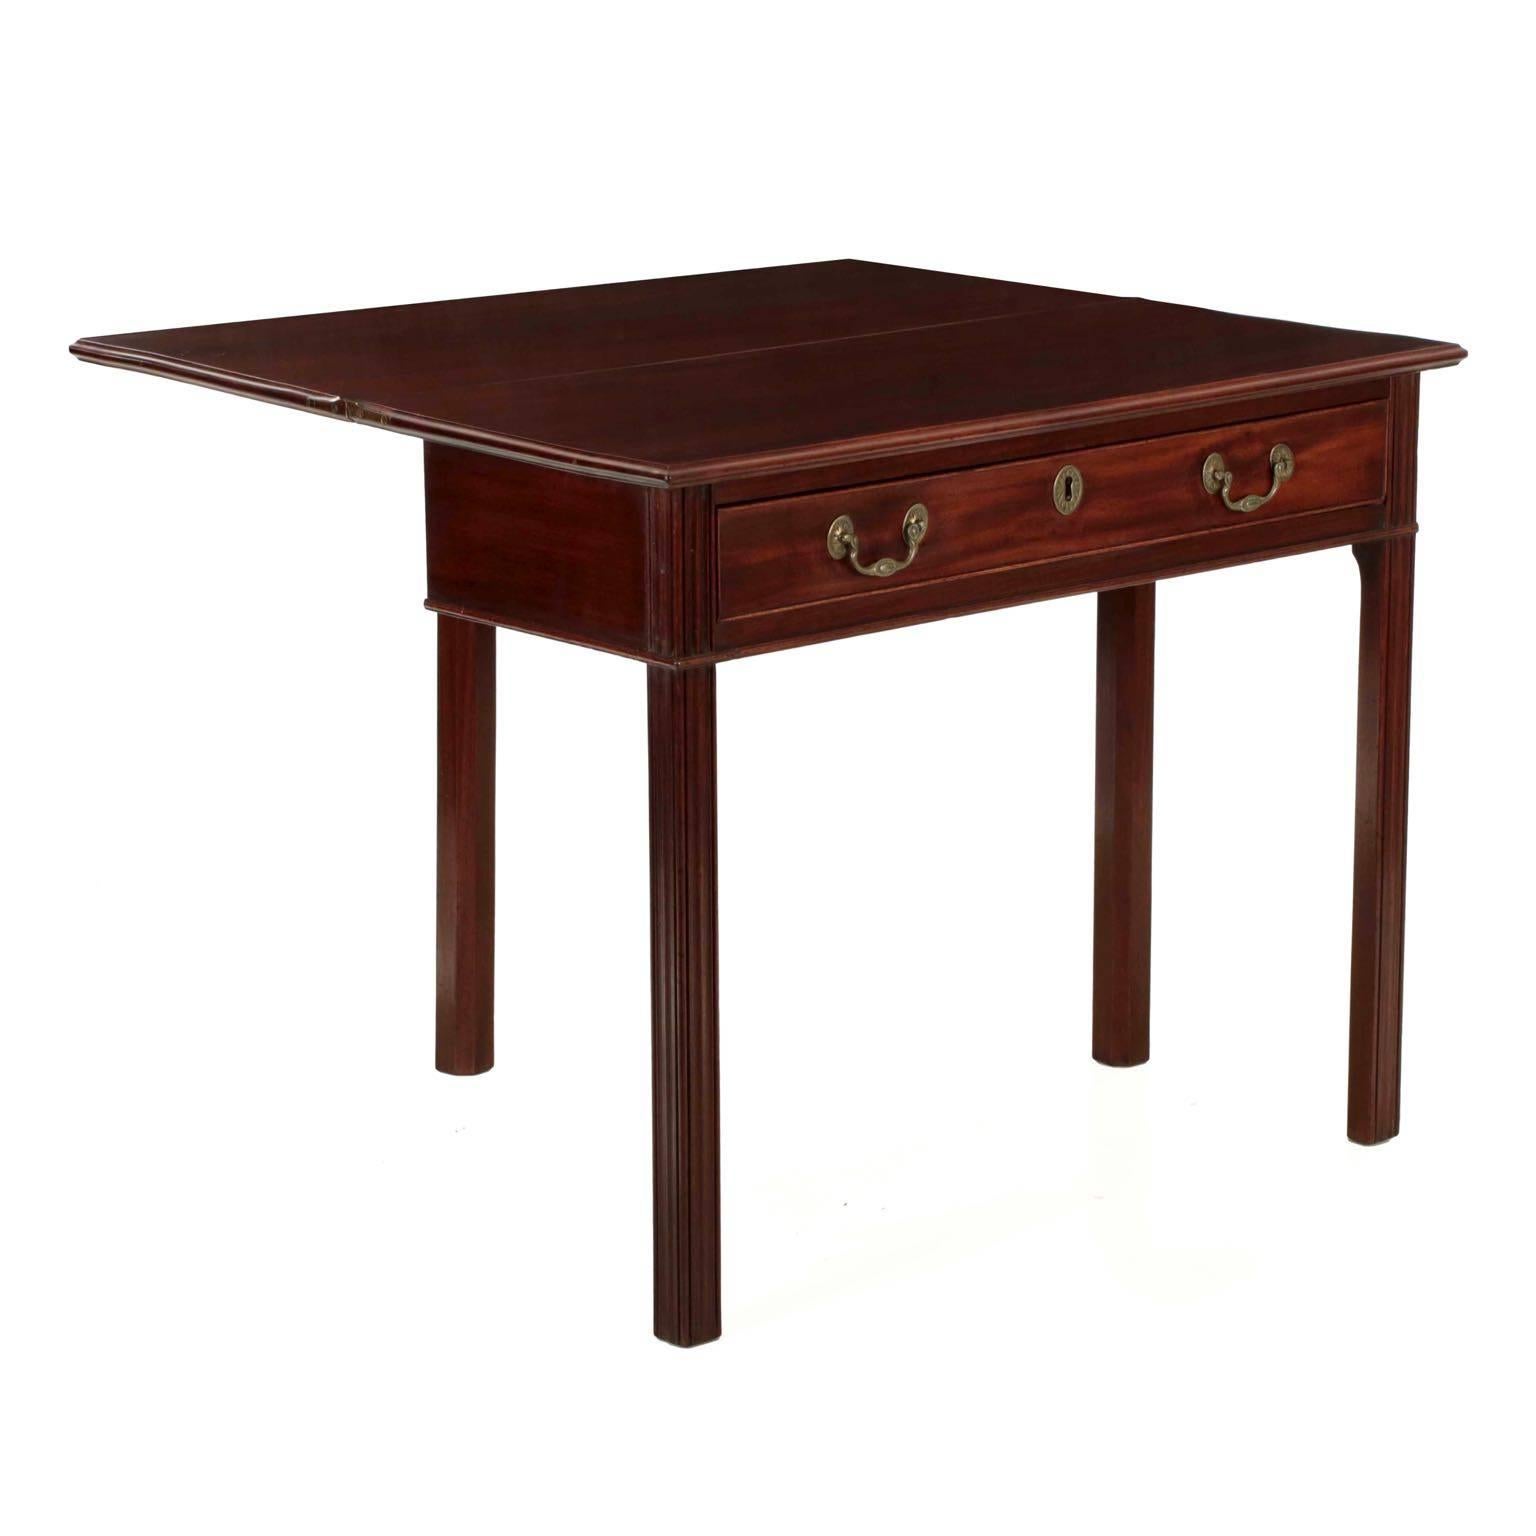 An elegant display of the distinct influence English forms had on the craftsmen of Philadelphia, this fine mahogany card table was executed contemporarily to the same forms in London throughout the last quarter of the 18th century. The materials are